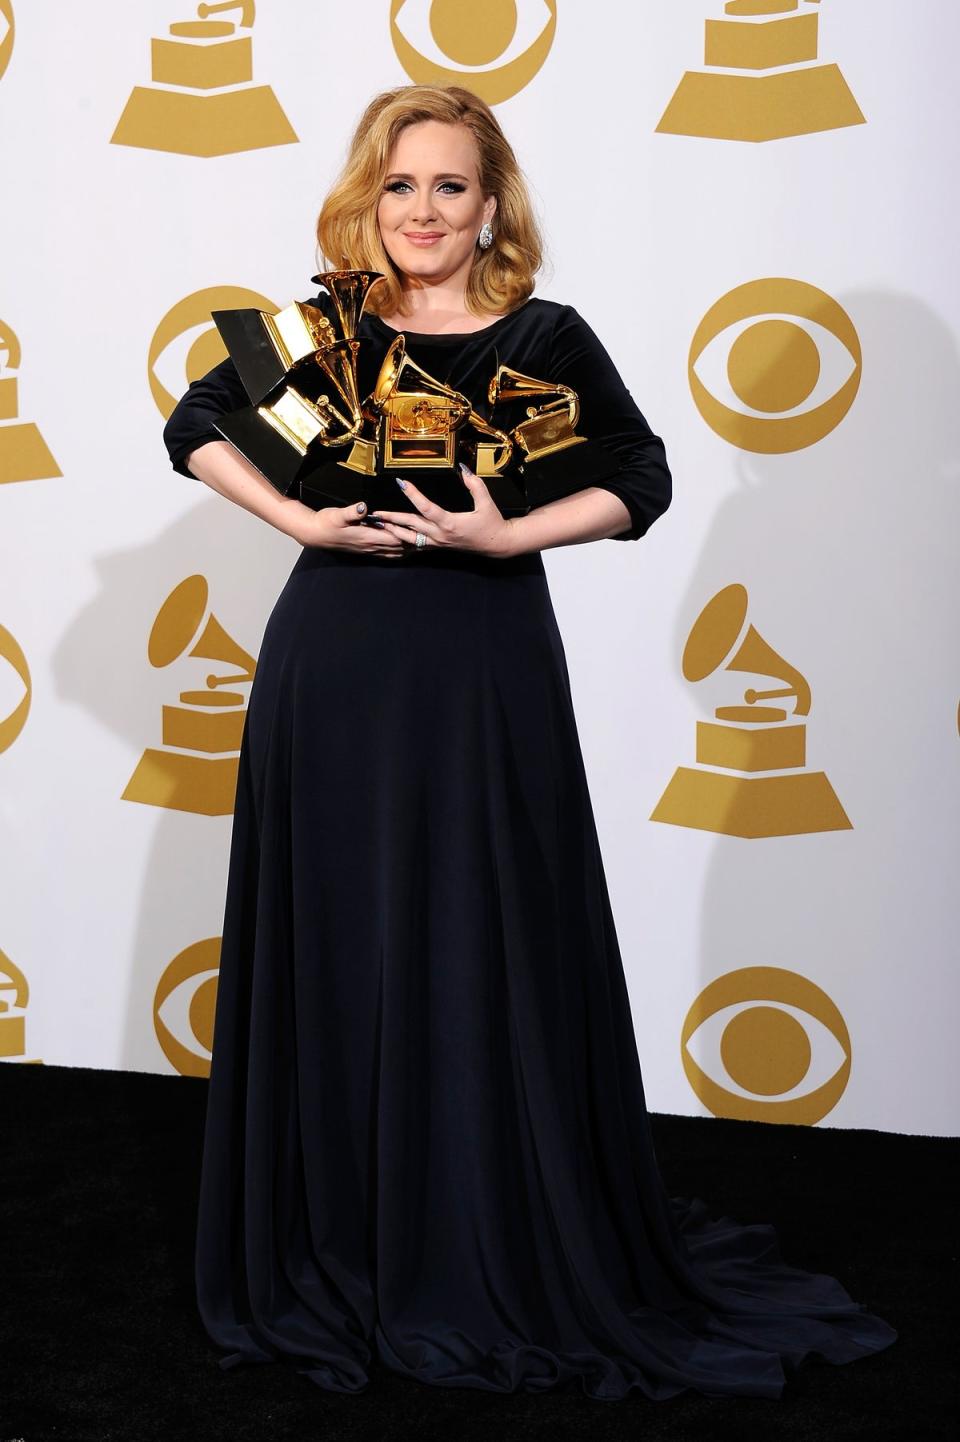 February 2012, Grammy Awards (Getty Images)